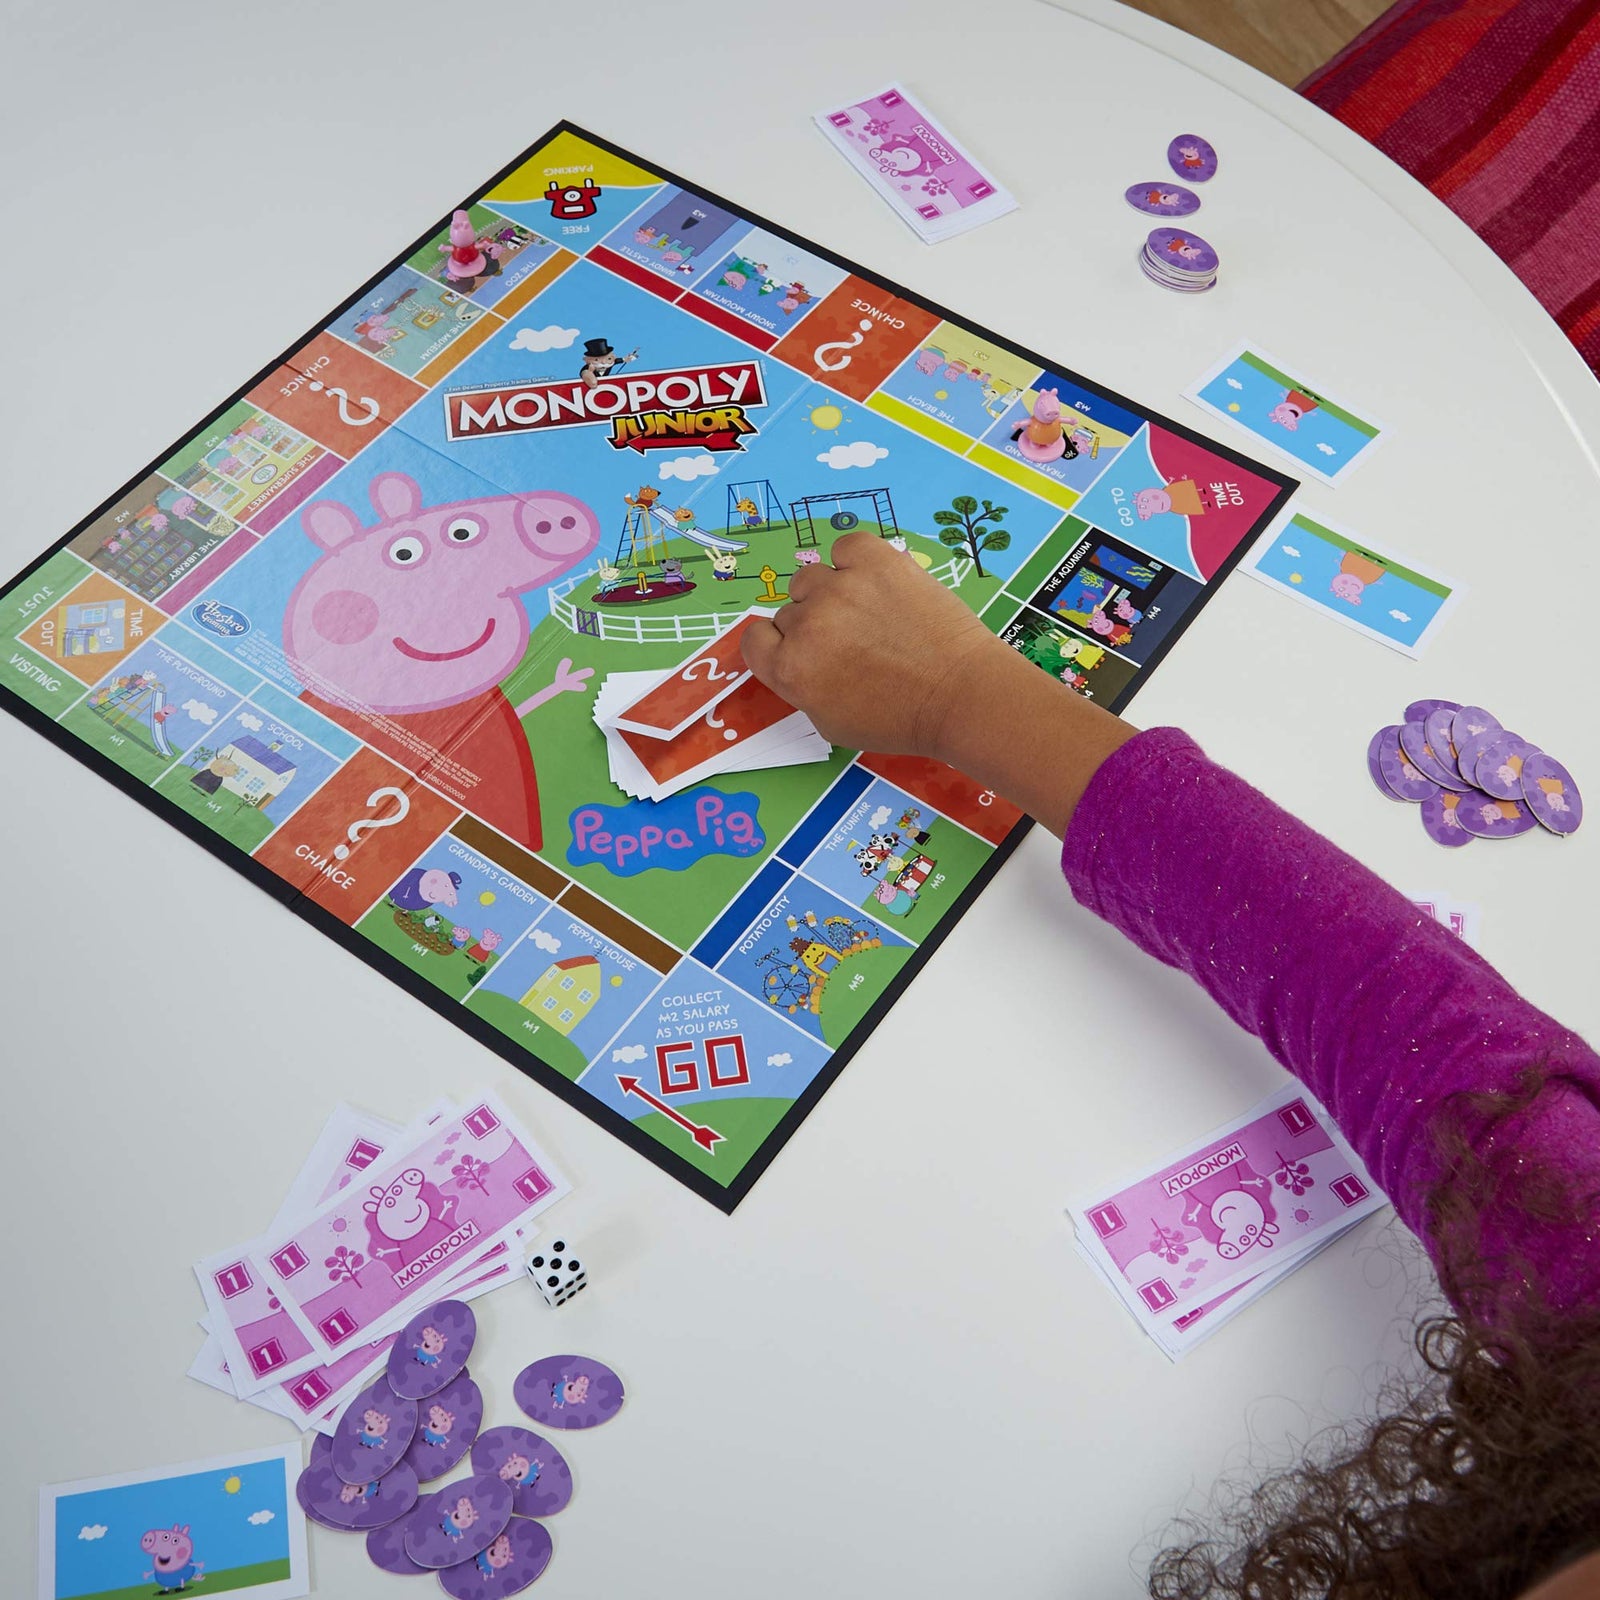 Hasbro Gaming Monopoly Junior: Peppa Pig Edition Board Game for 2-4 Players, Indoor Game for Kids Ages 5 and Up (Amazon Exclusive)